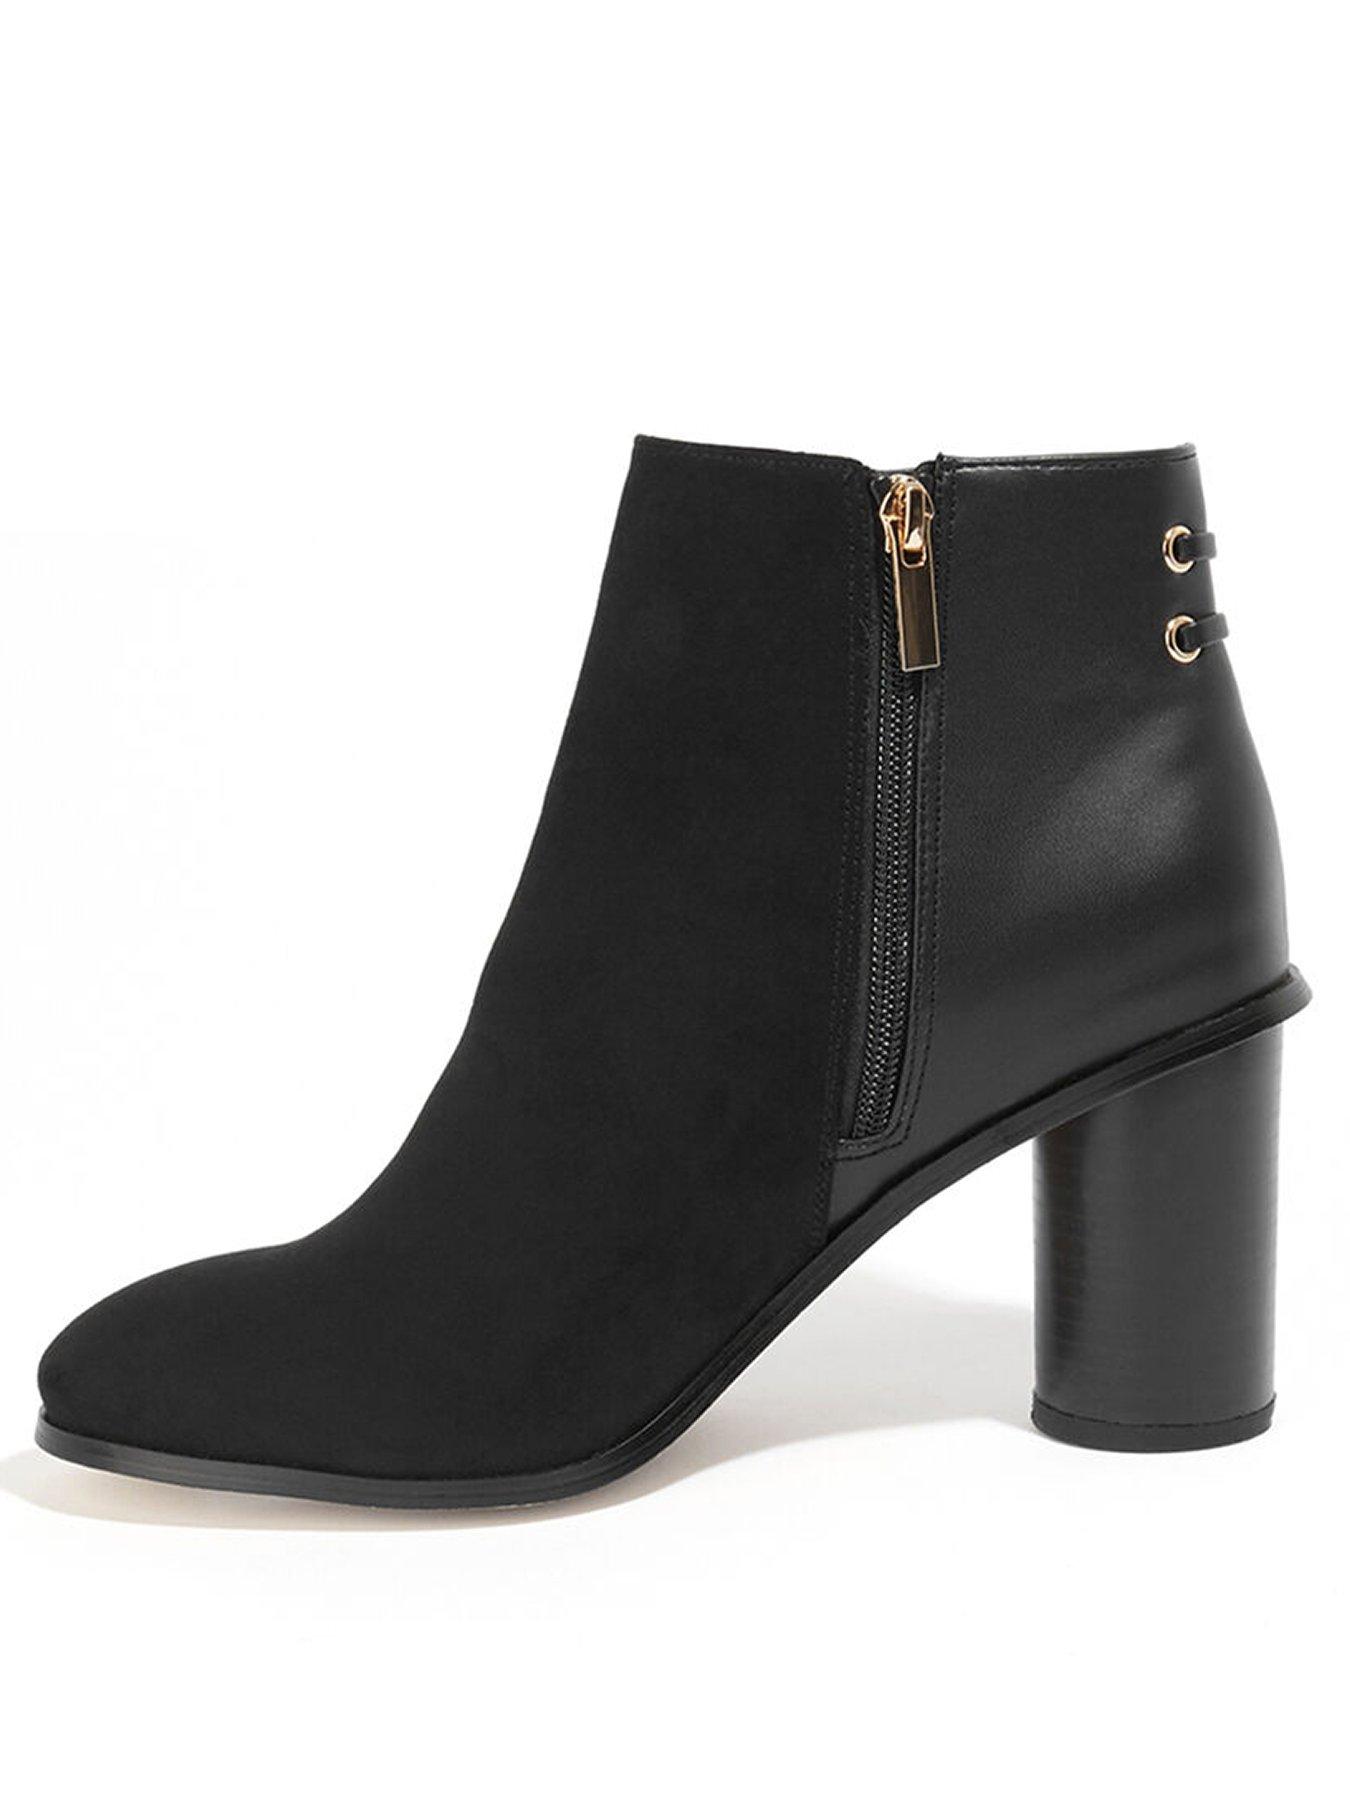 Oasis Serena Round Heel Ankle Boots 